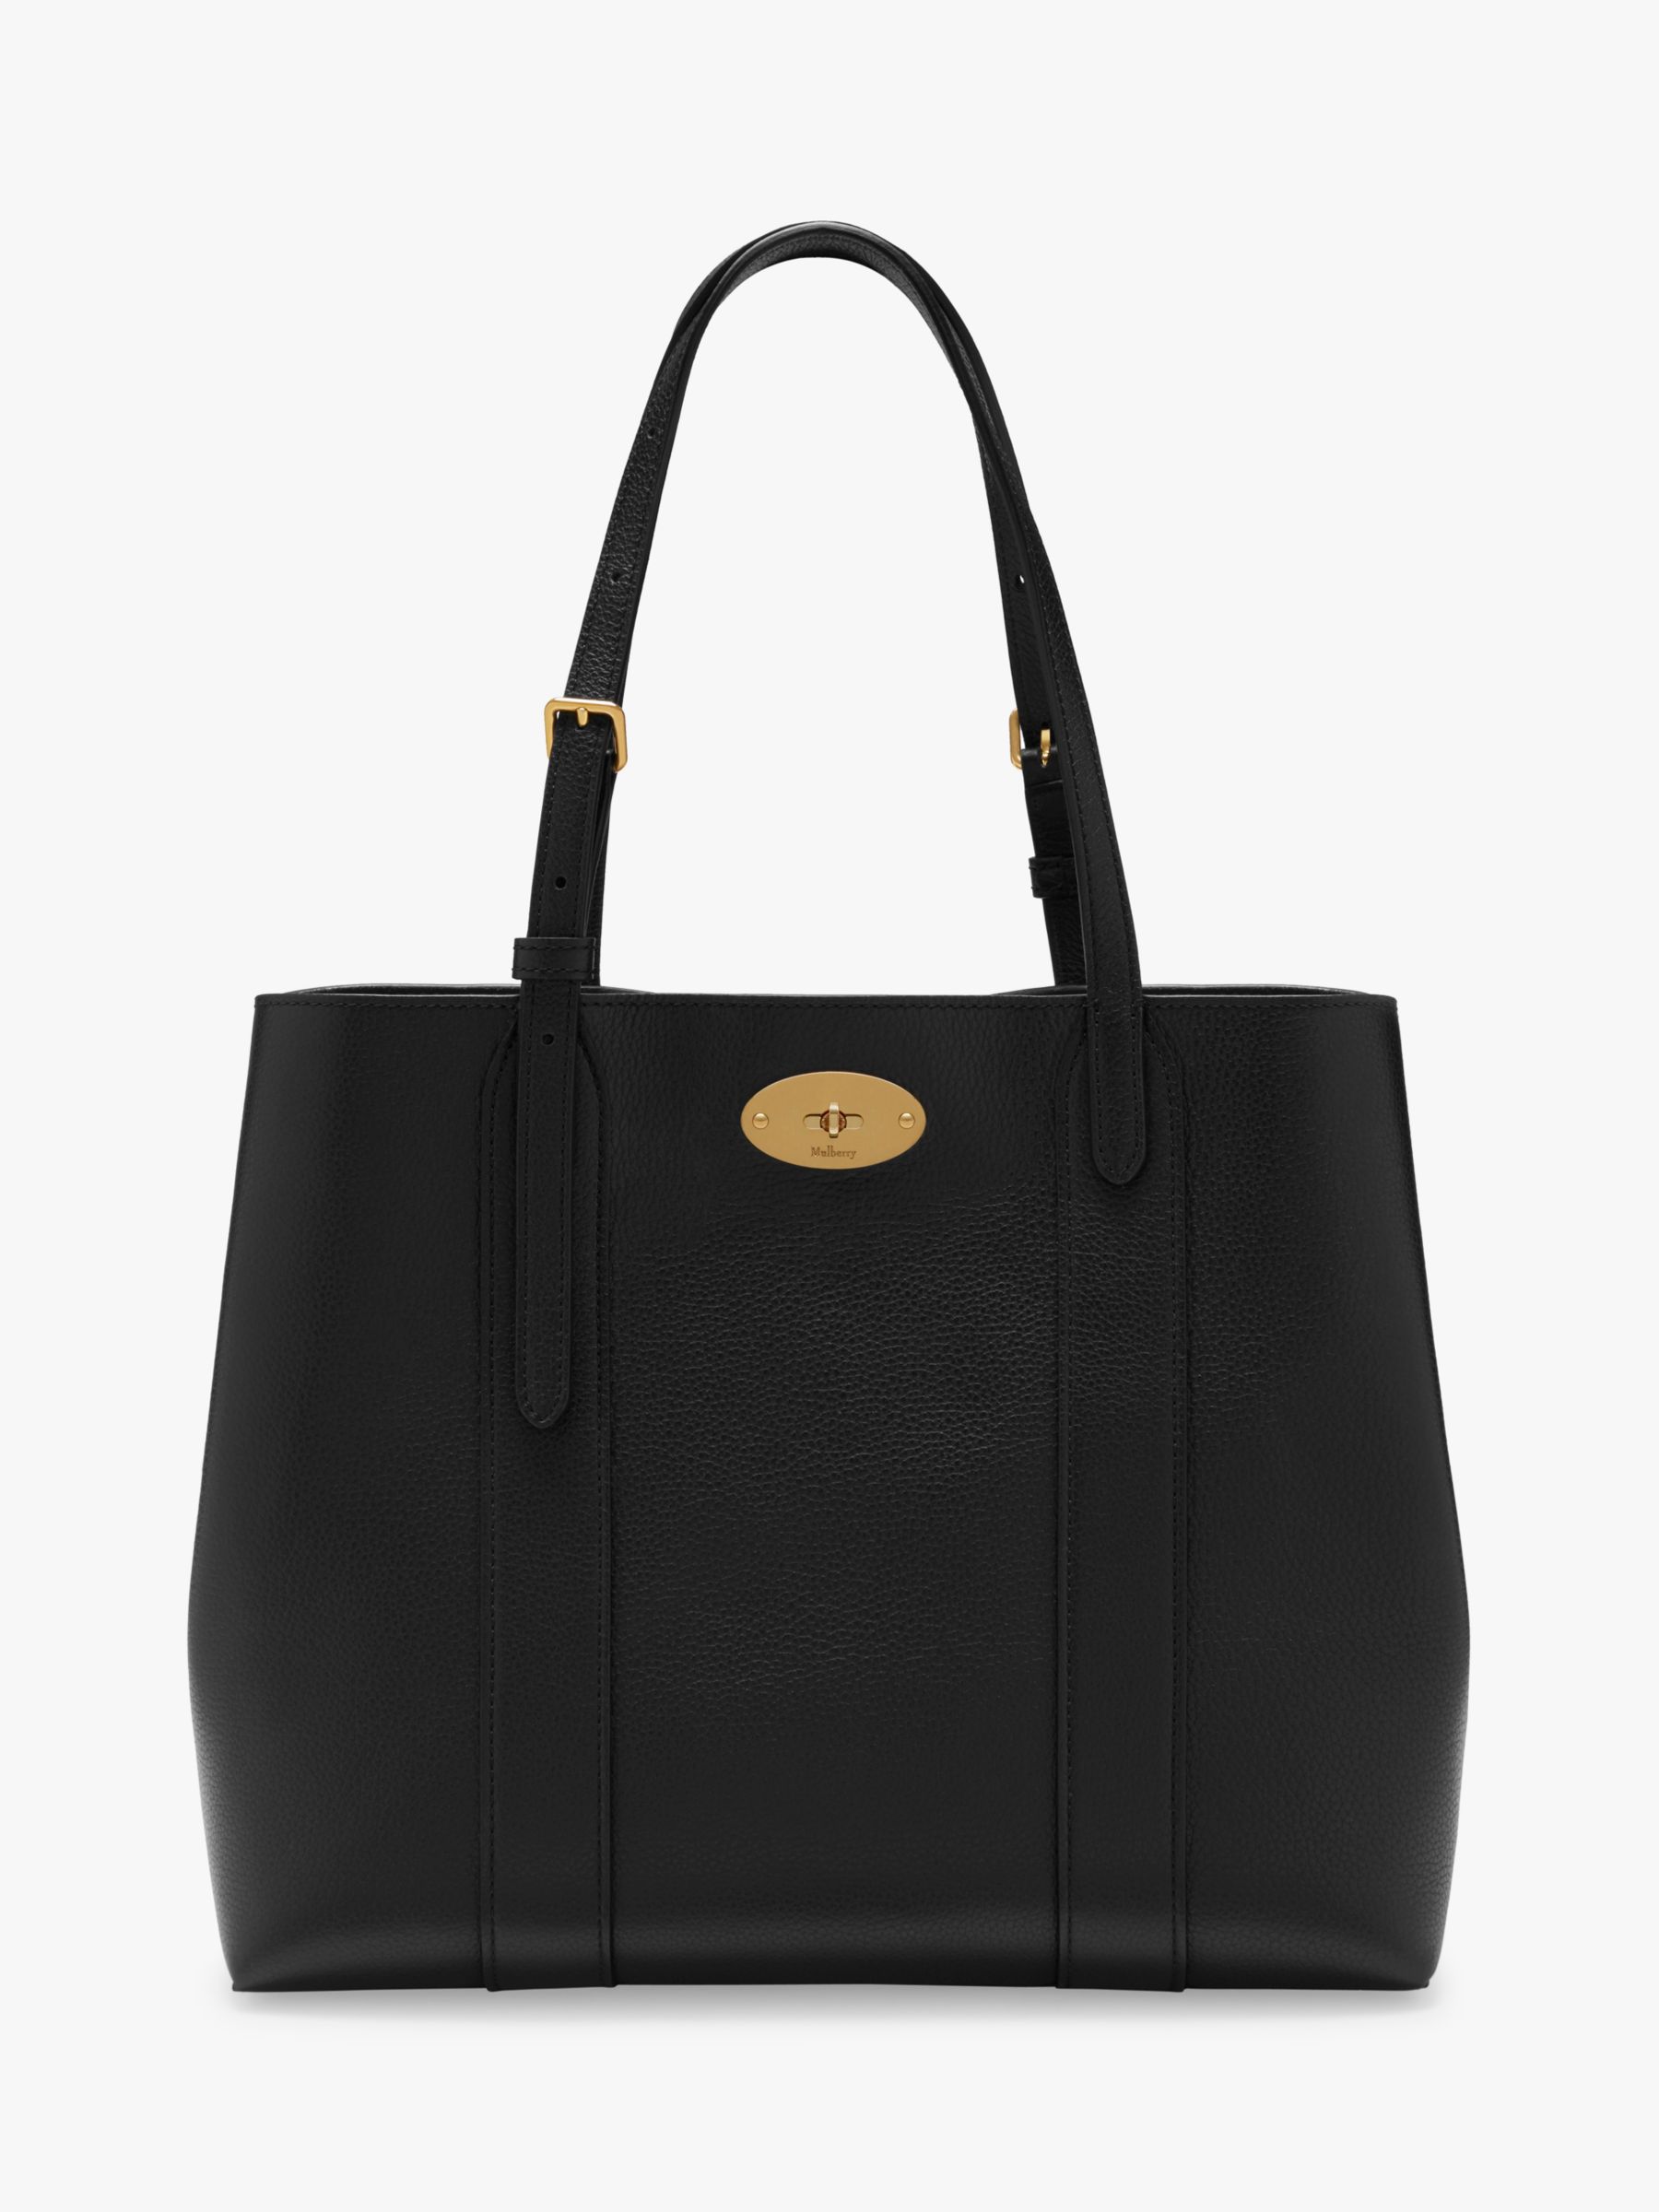 Mulberry Small Bayswater Classic Grain Leather Tote Bag, Black at John Lewis & Partners